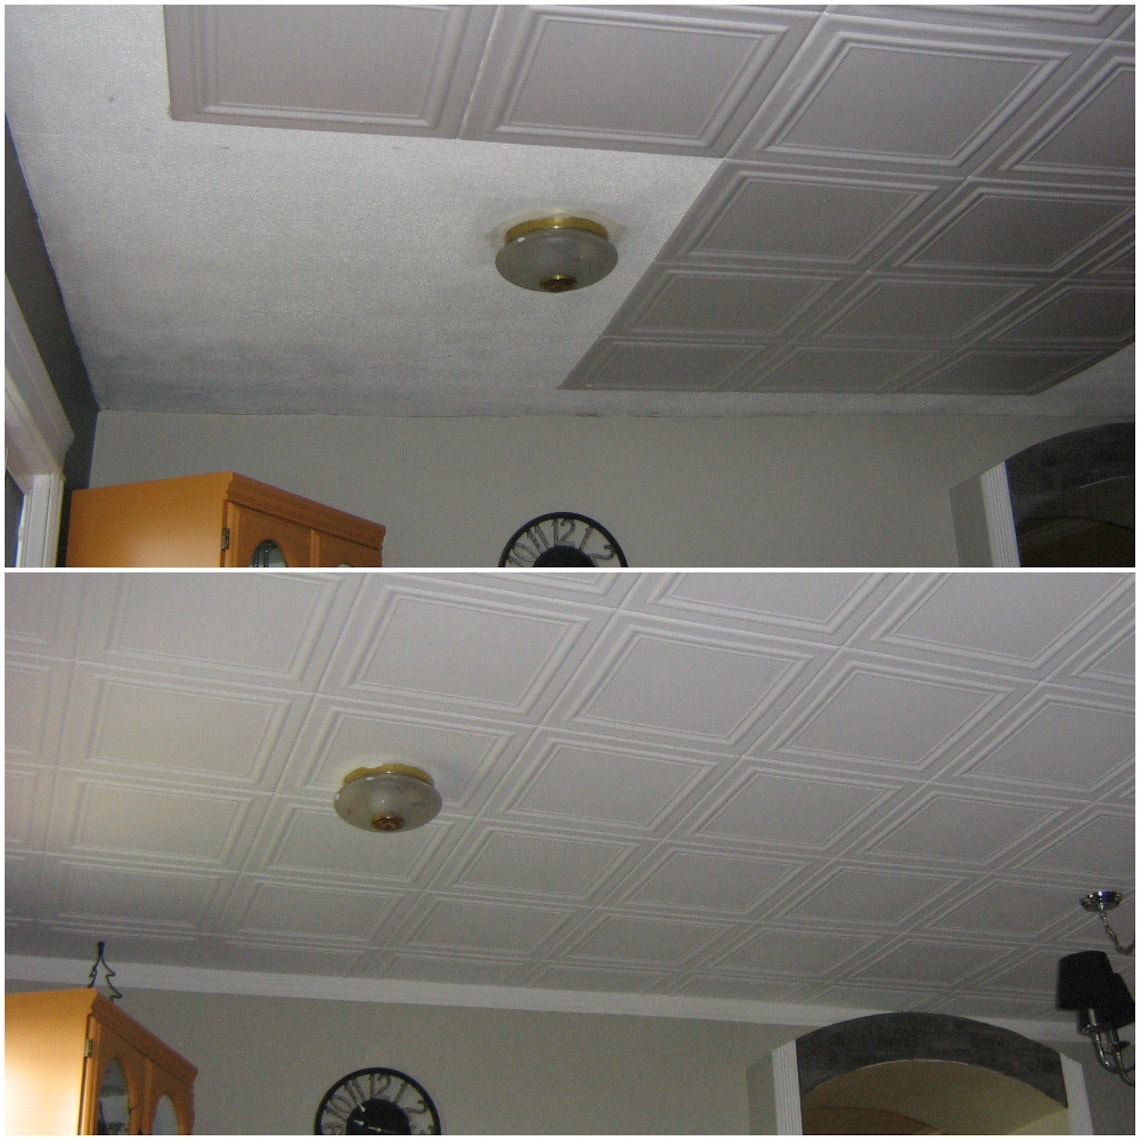 Ceiling Tiles To Cover Popcorn Ceiling Three Strikes And Out